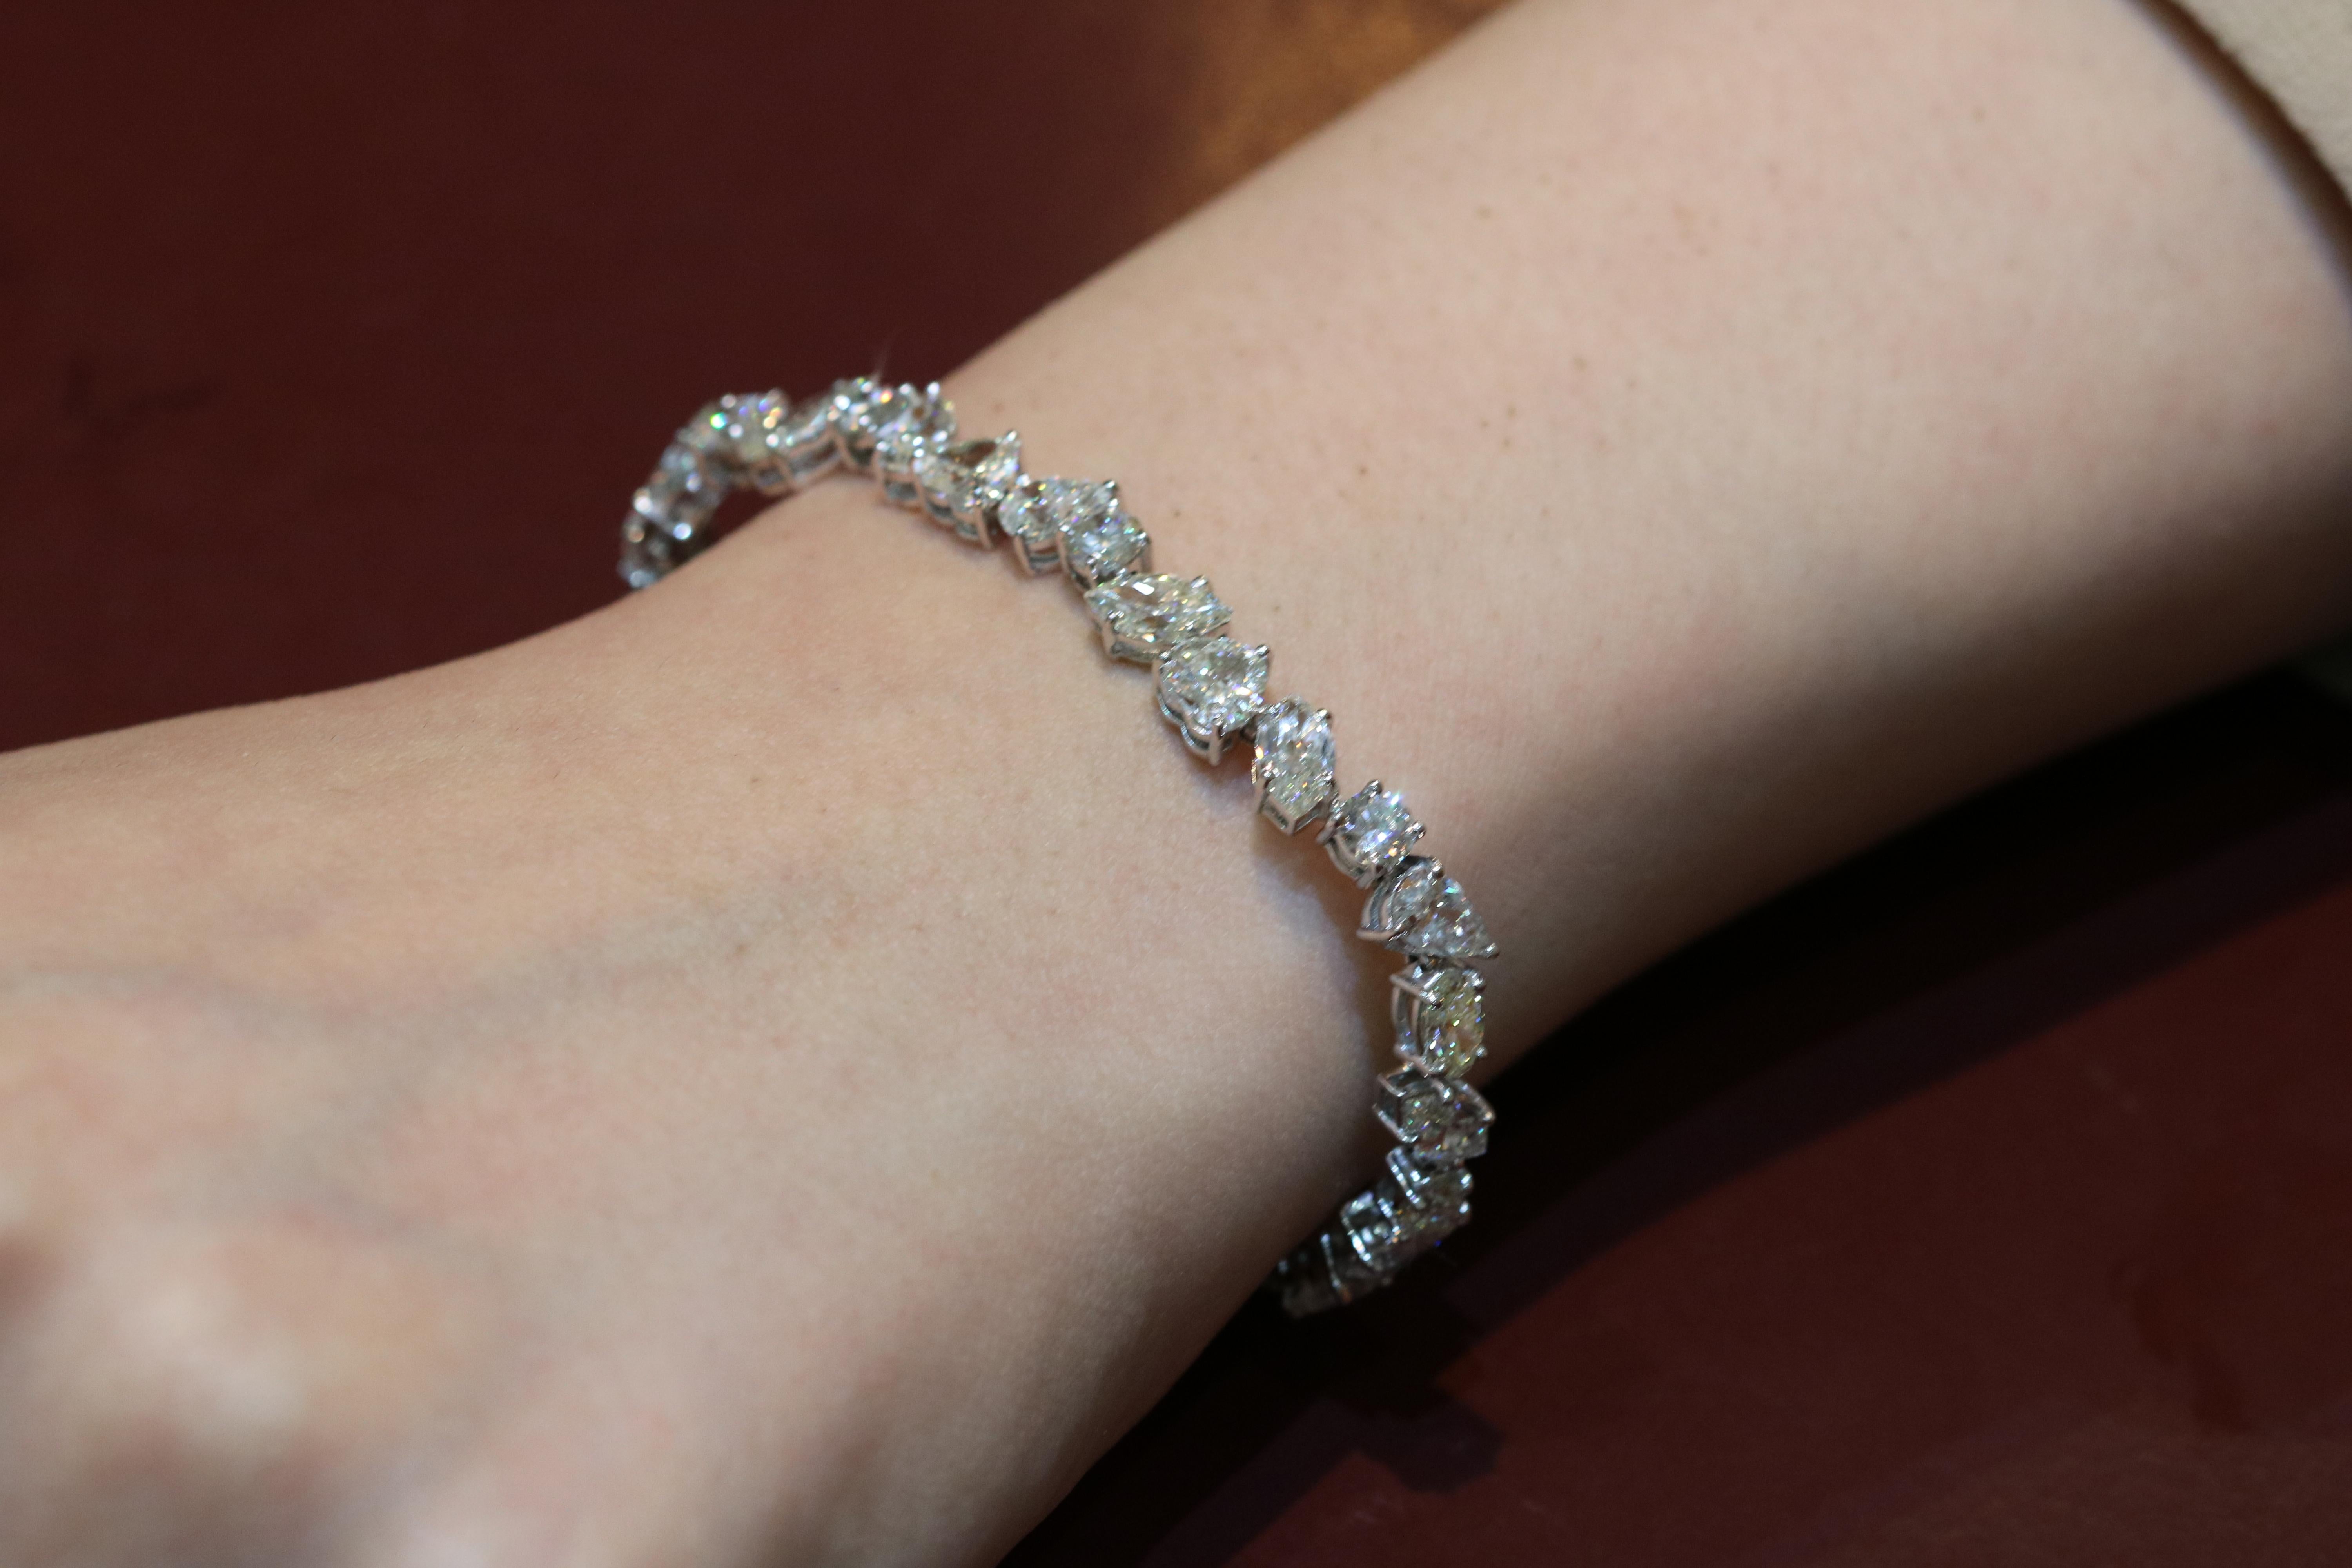 This round, heart, oval, and marquise cut diamond bracelet is an ultimate expression of precious beauty. The multi-shape 18 Karat white gold bracelet allows the radiant brilliance of a classic diamond to shine through, making it an enchanting and